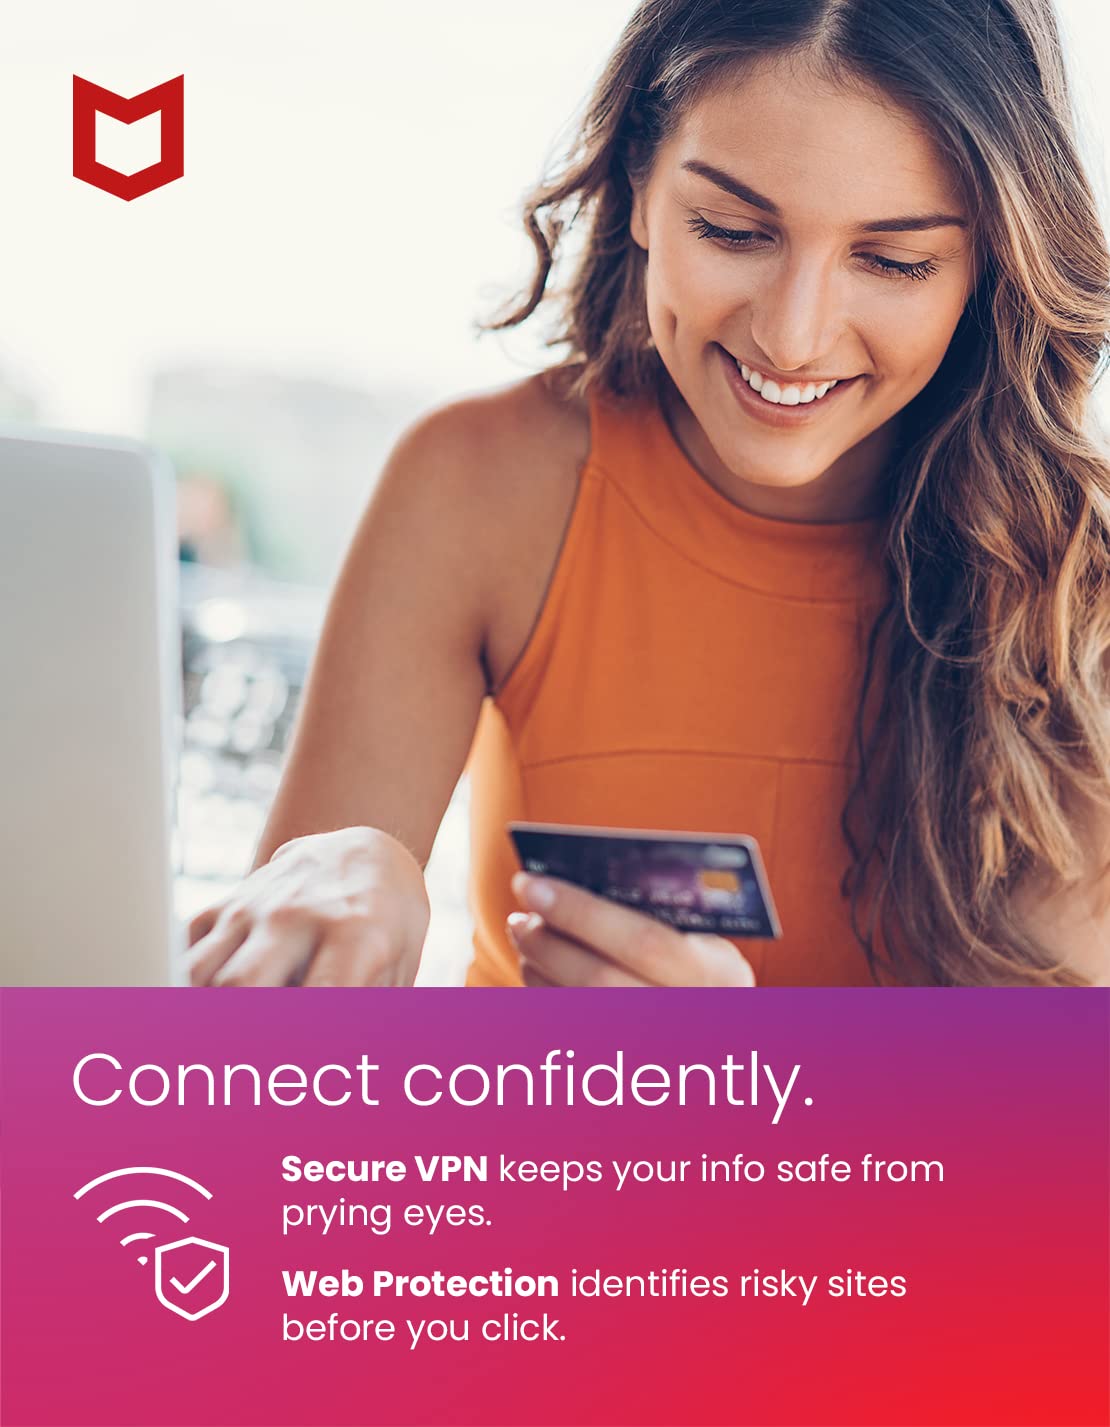 McAfee Total Protection | 3 Device | Antivirus Internet Security Software | VPN, Password Manager, Dark Web Monitoring | 1 Year Subscription | Download Code